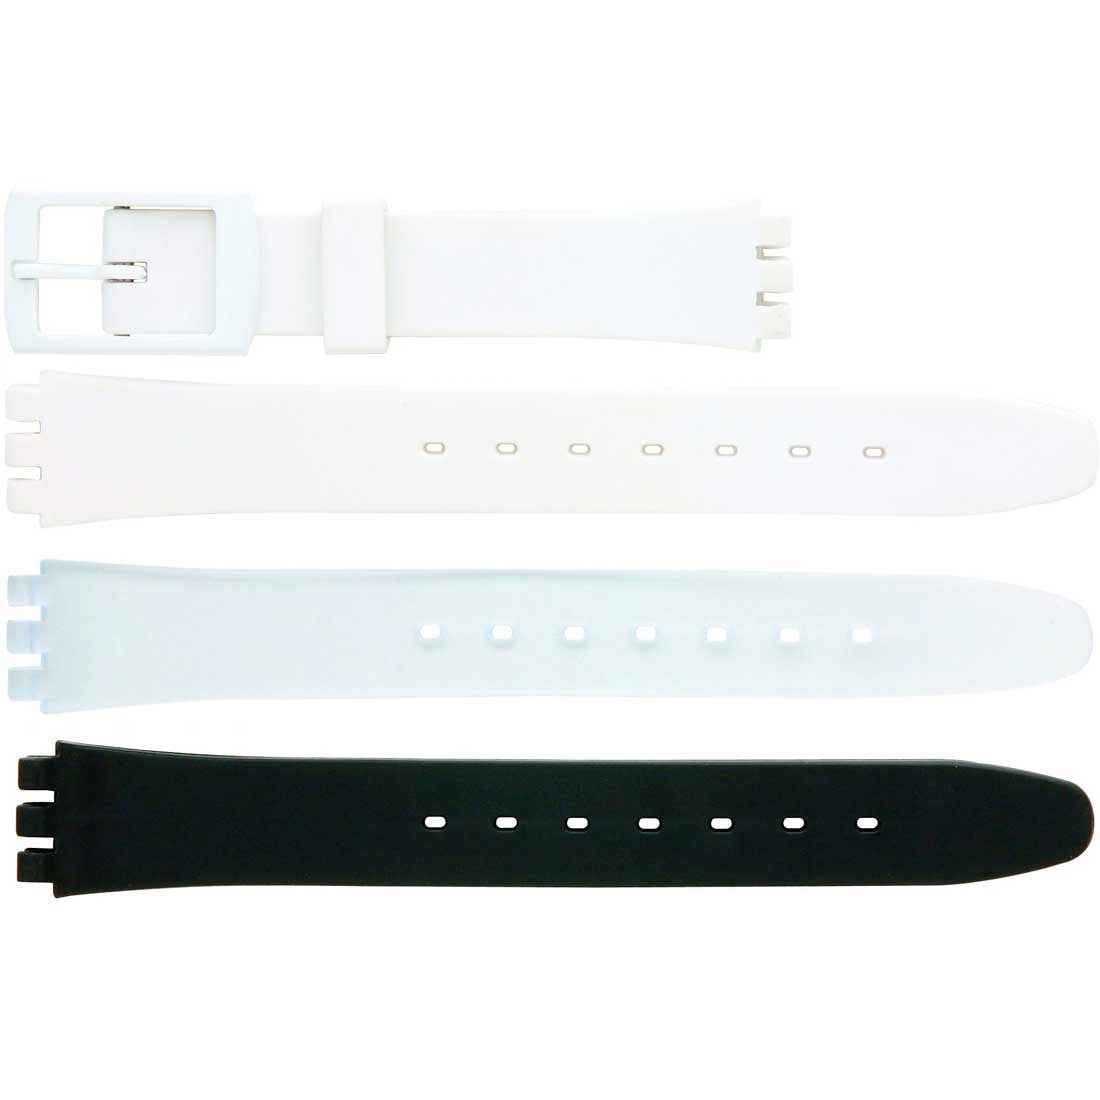 P260 Swatch Style Lady's Straps